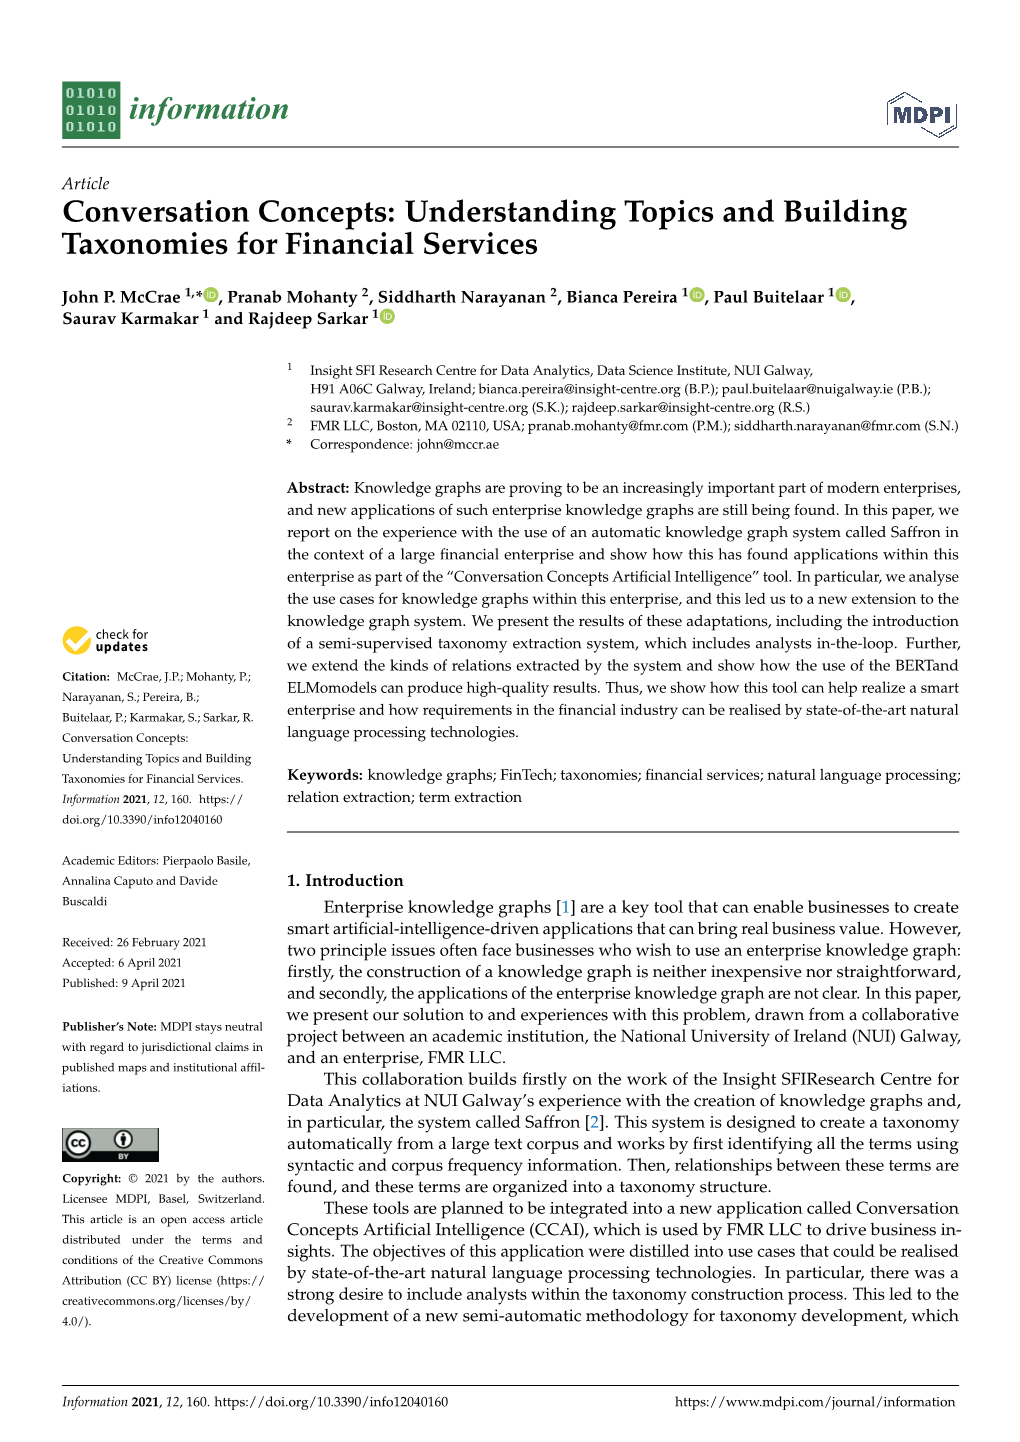 Understanding Topics and Building Taxonomies for Financial Services